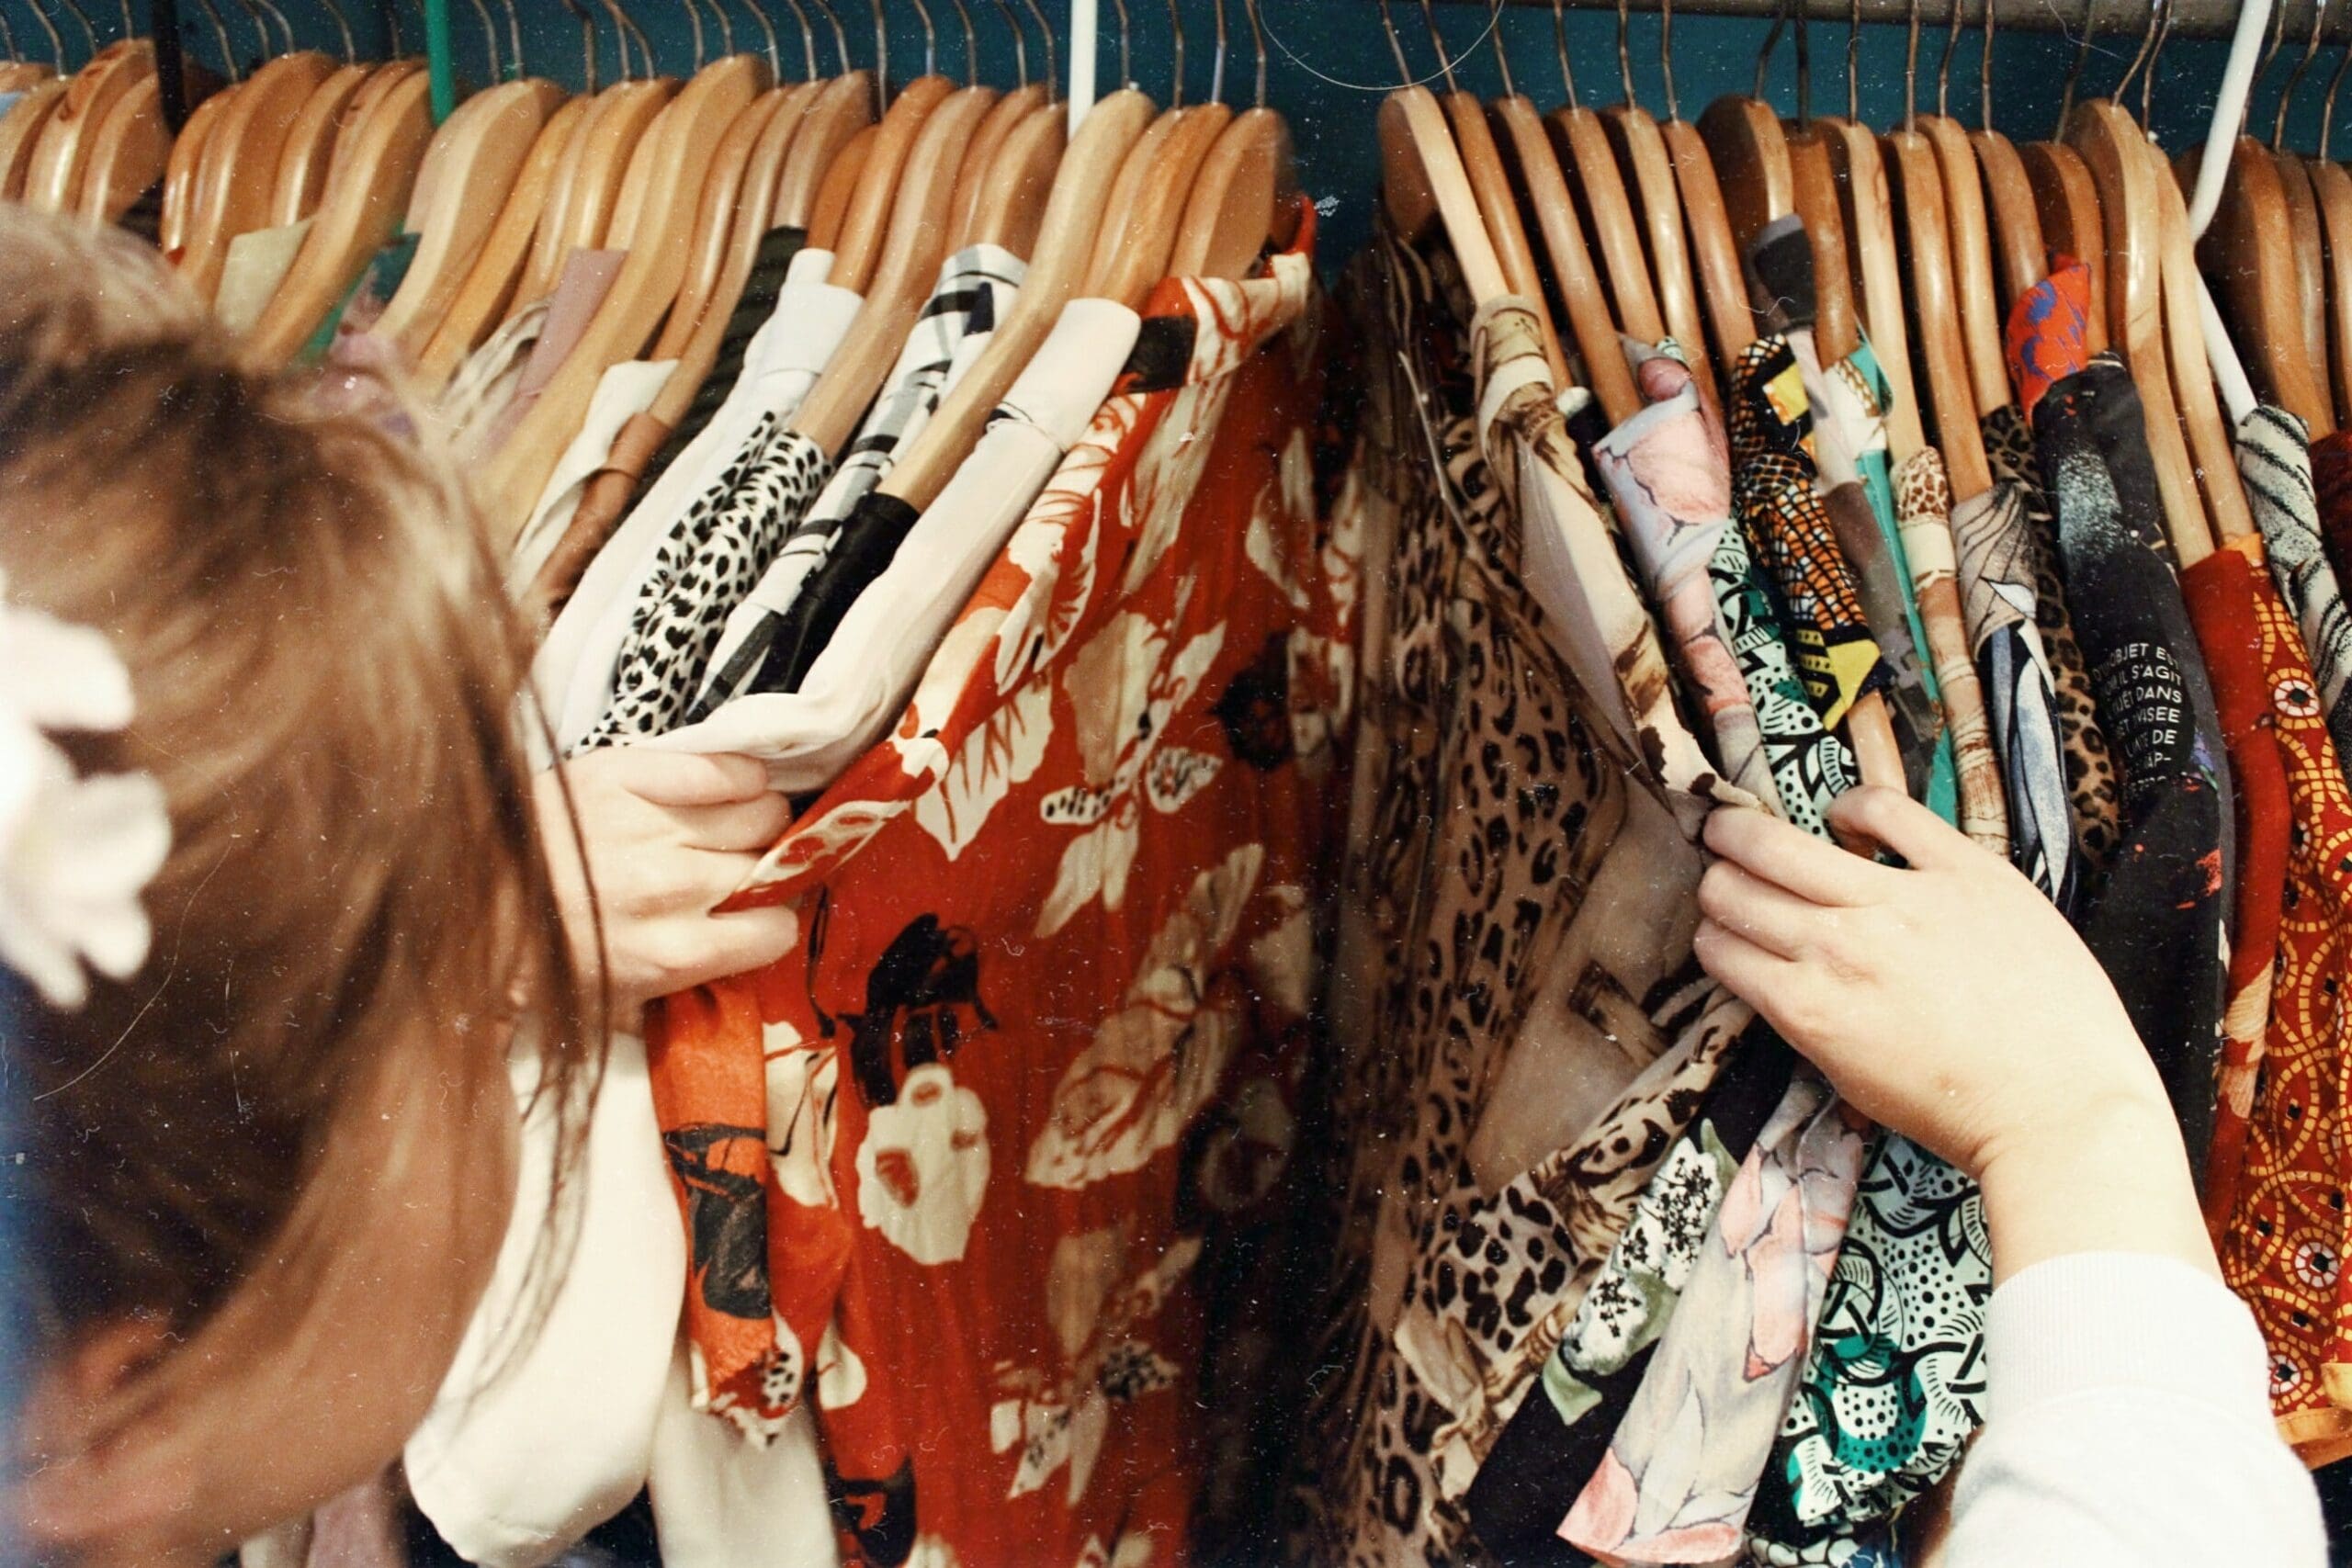 Image of a woman looking through a rack of clothes.